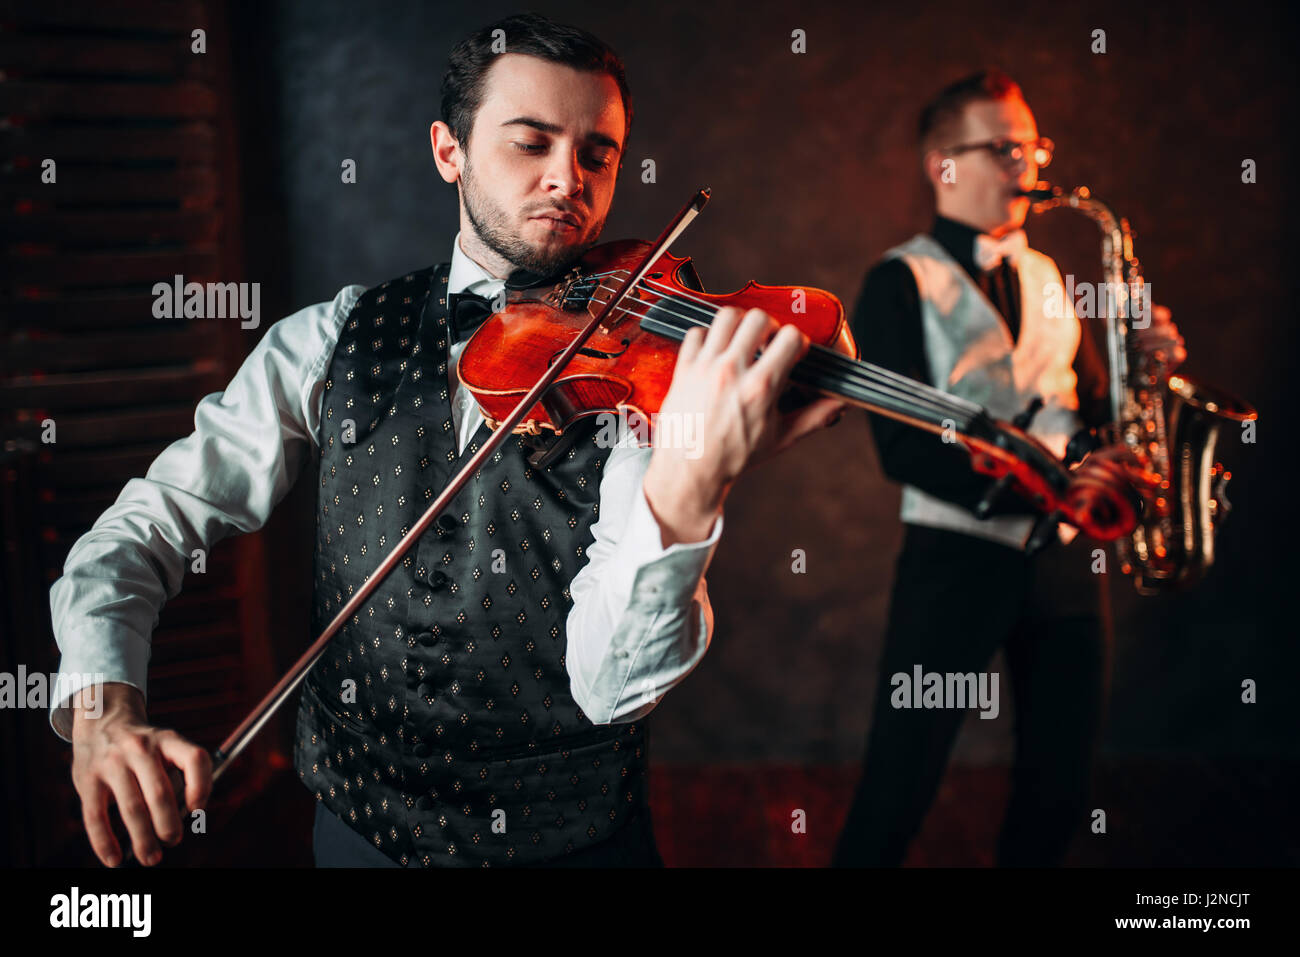 Jazz man and violinst, classical musical duet. Sax and fiddle music players Stock Photo